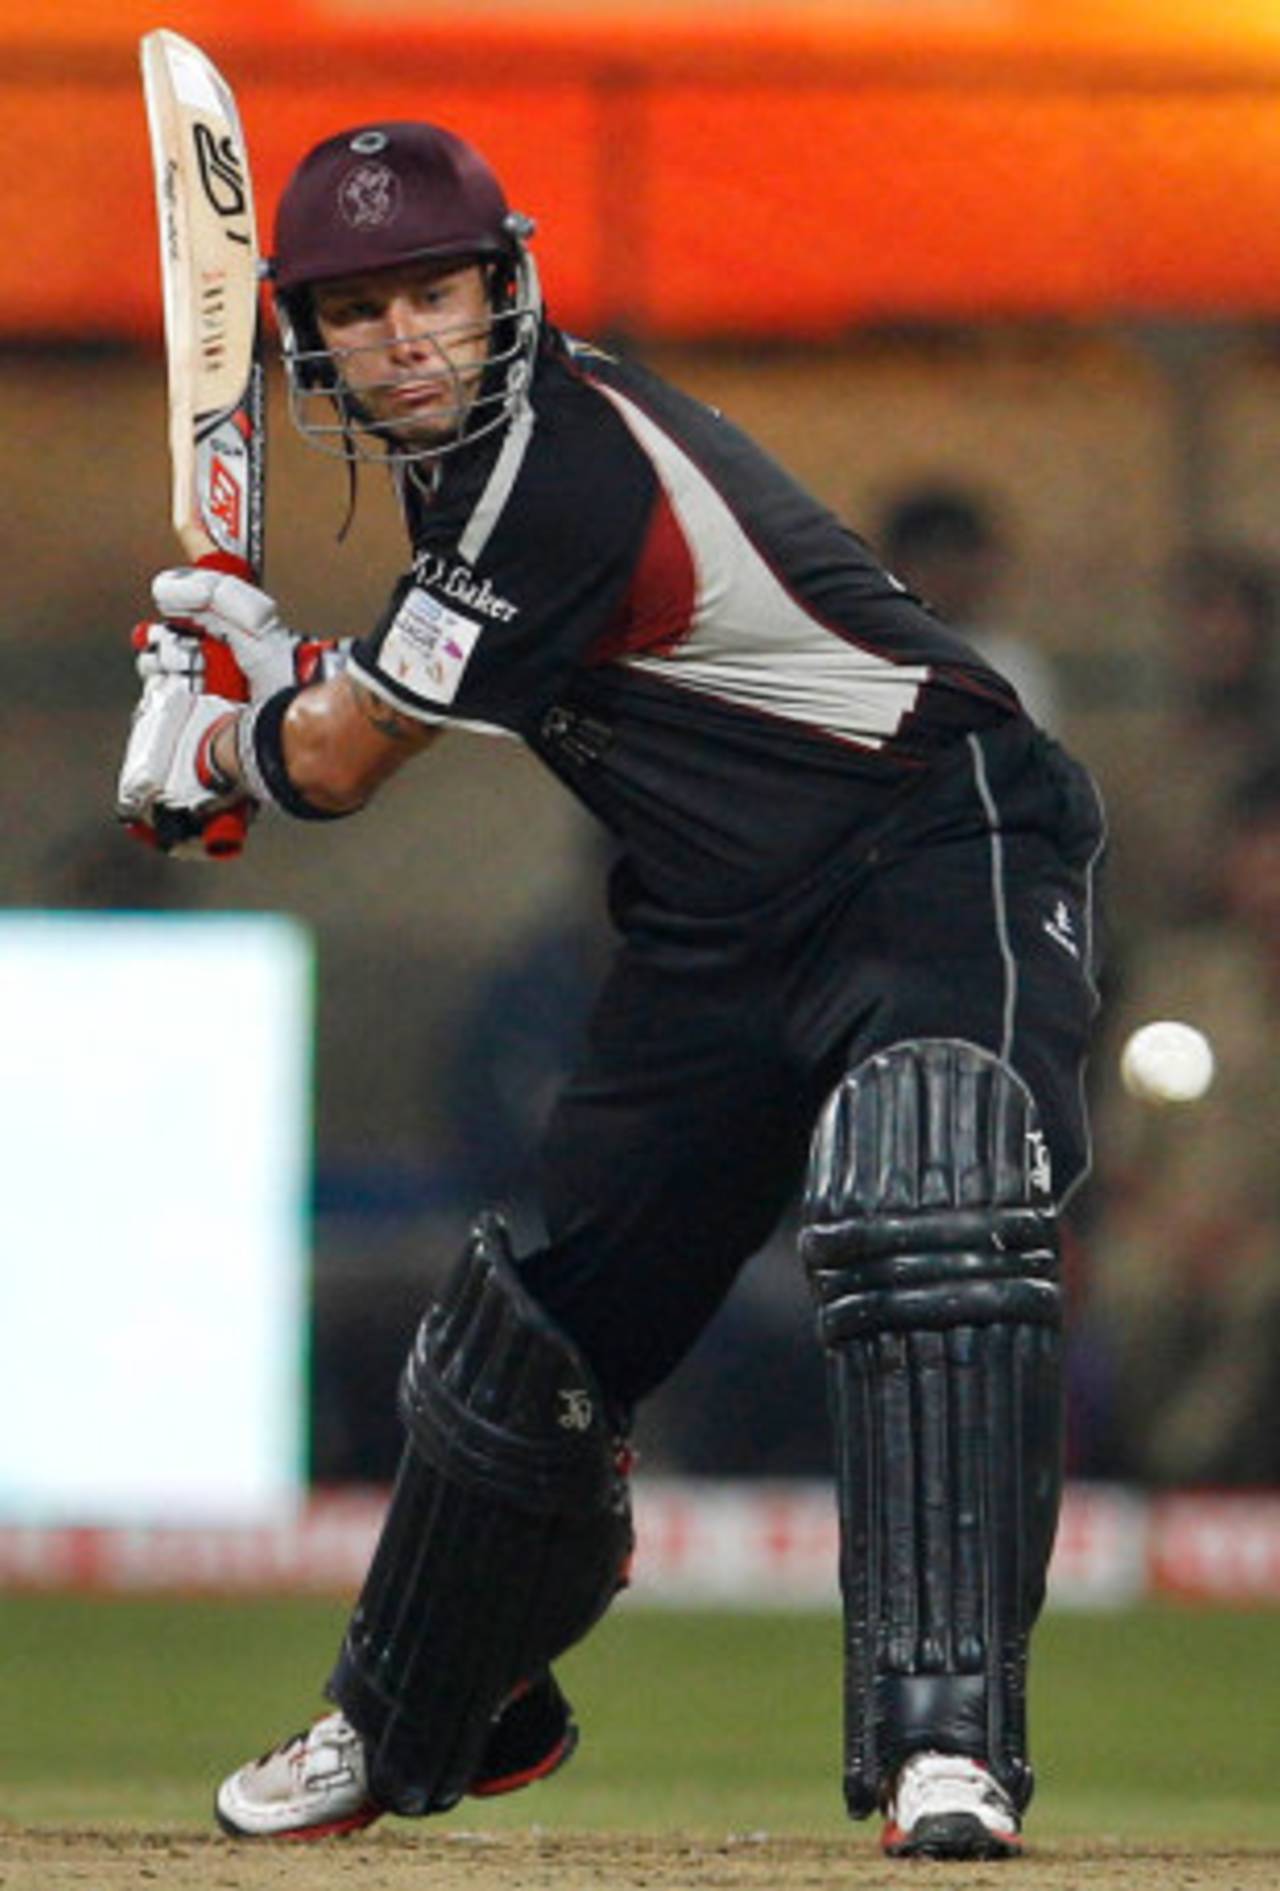 Peter Trego lines up a hit during his half-century, Royal Challengers Bangalore v Somerset, Champions League Twenty20, Bangalore, October 3, 2011

